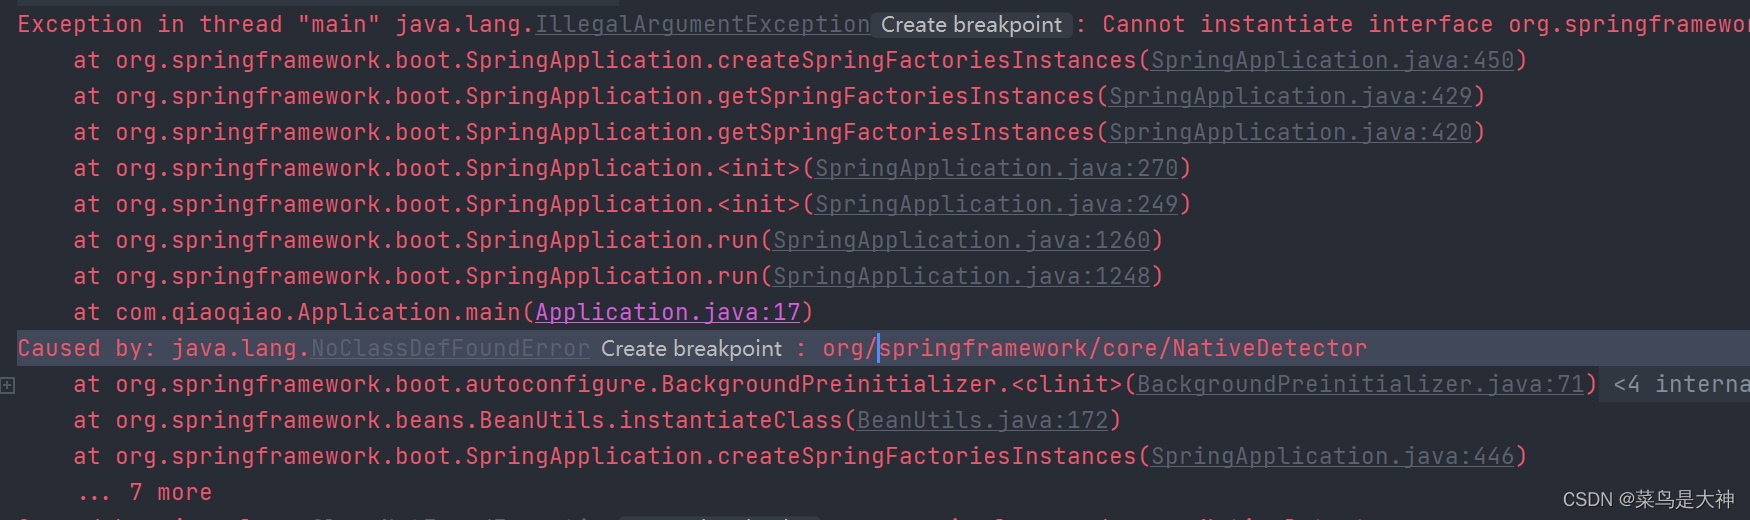 Exception in thread “main“ java.lang.IllegalArgumentException: Cannot instantiate interface org.spri